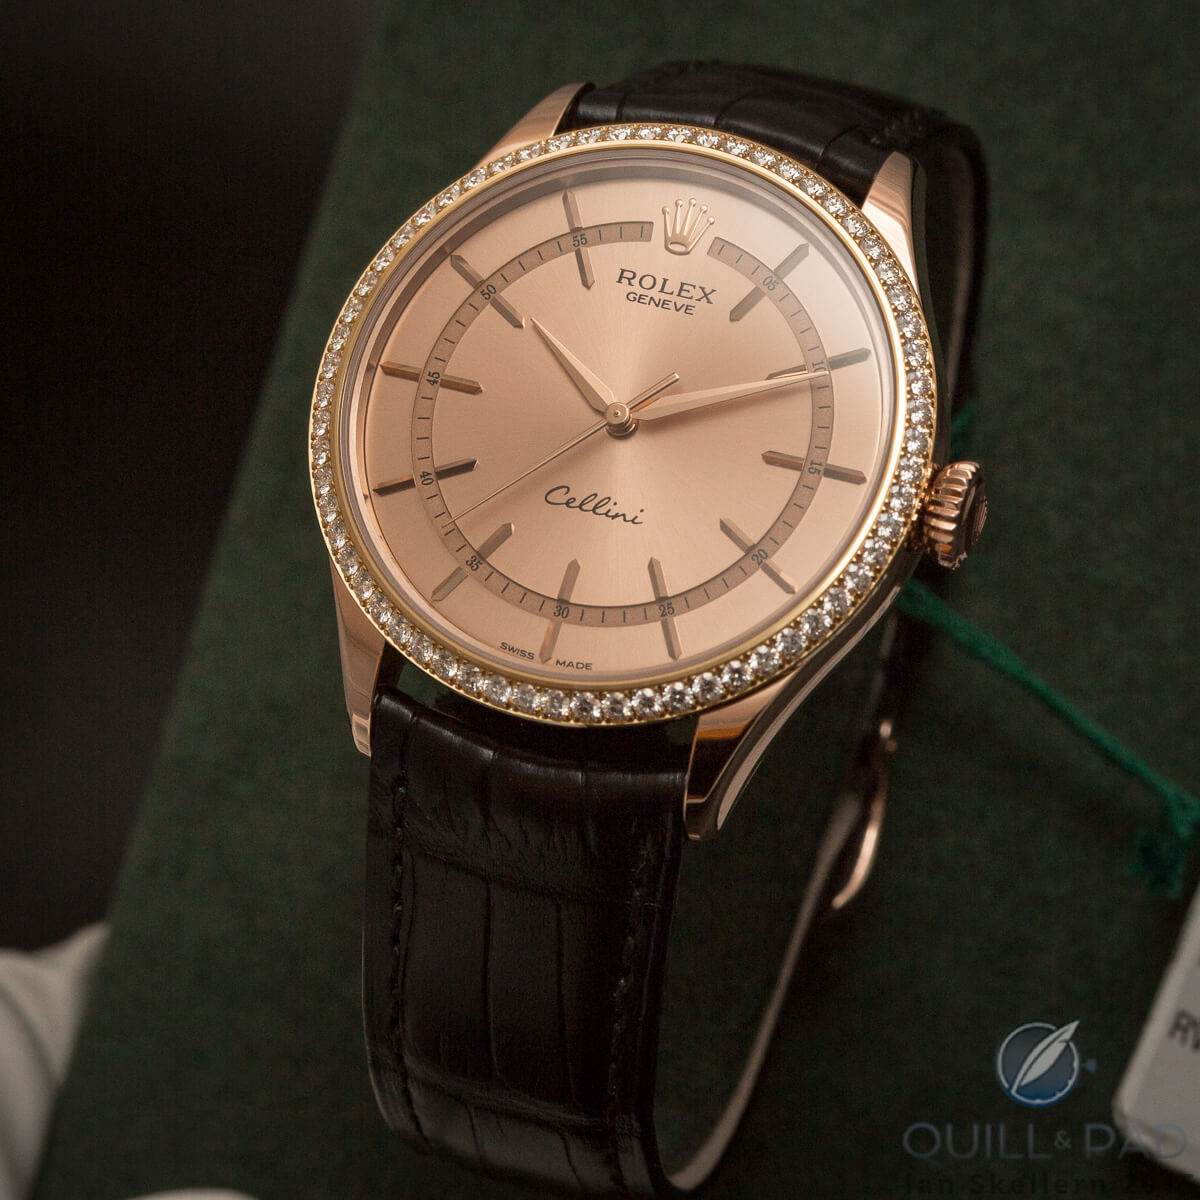 Rolex Cellini with golden dial and diamond-set bezel